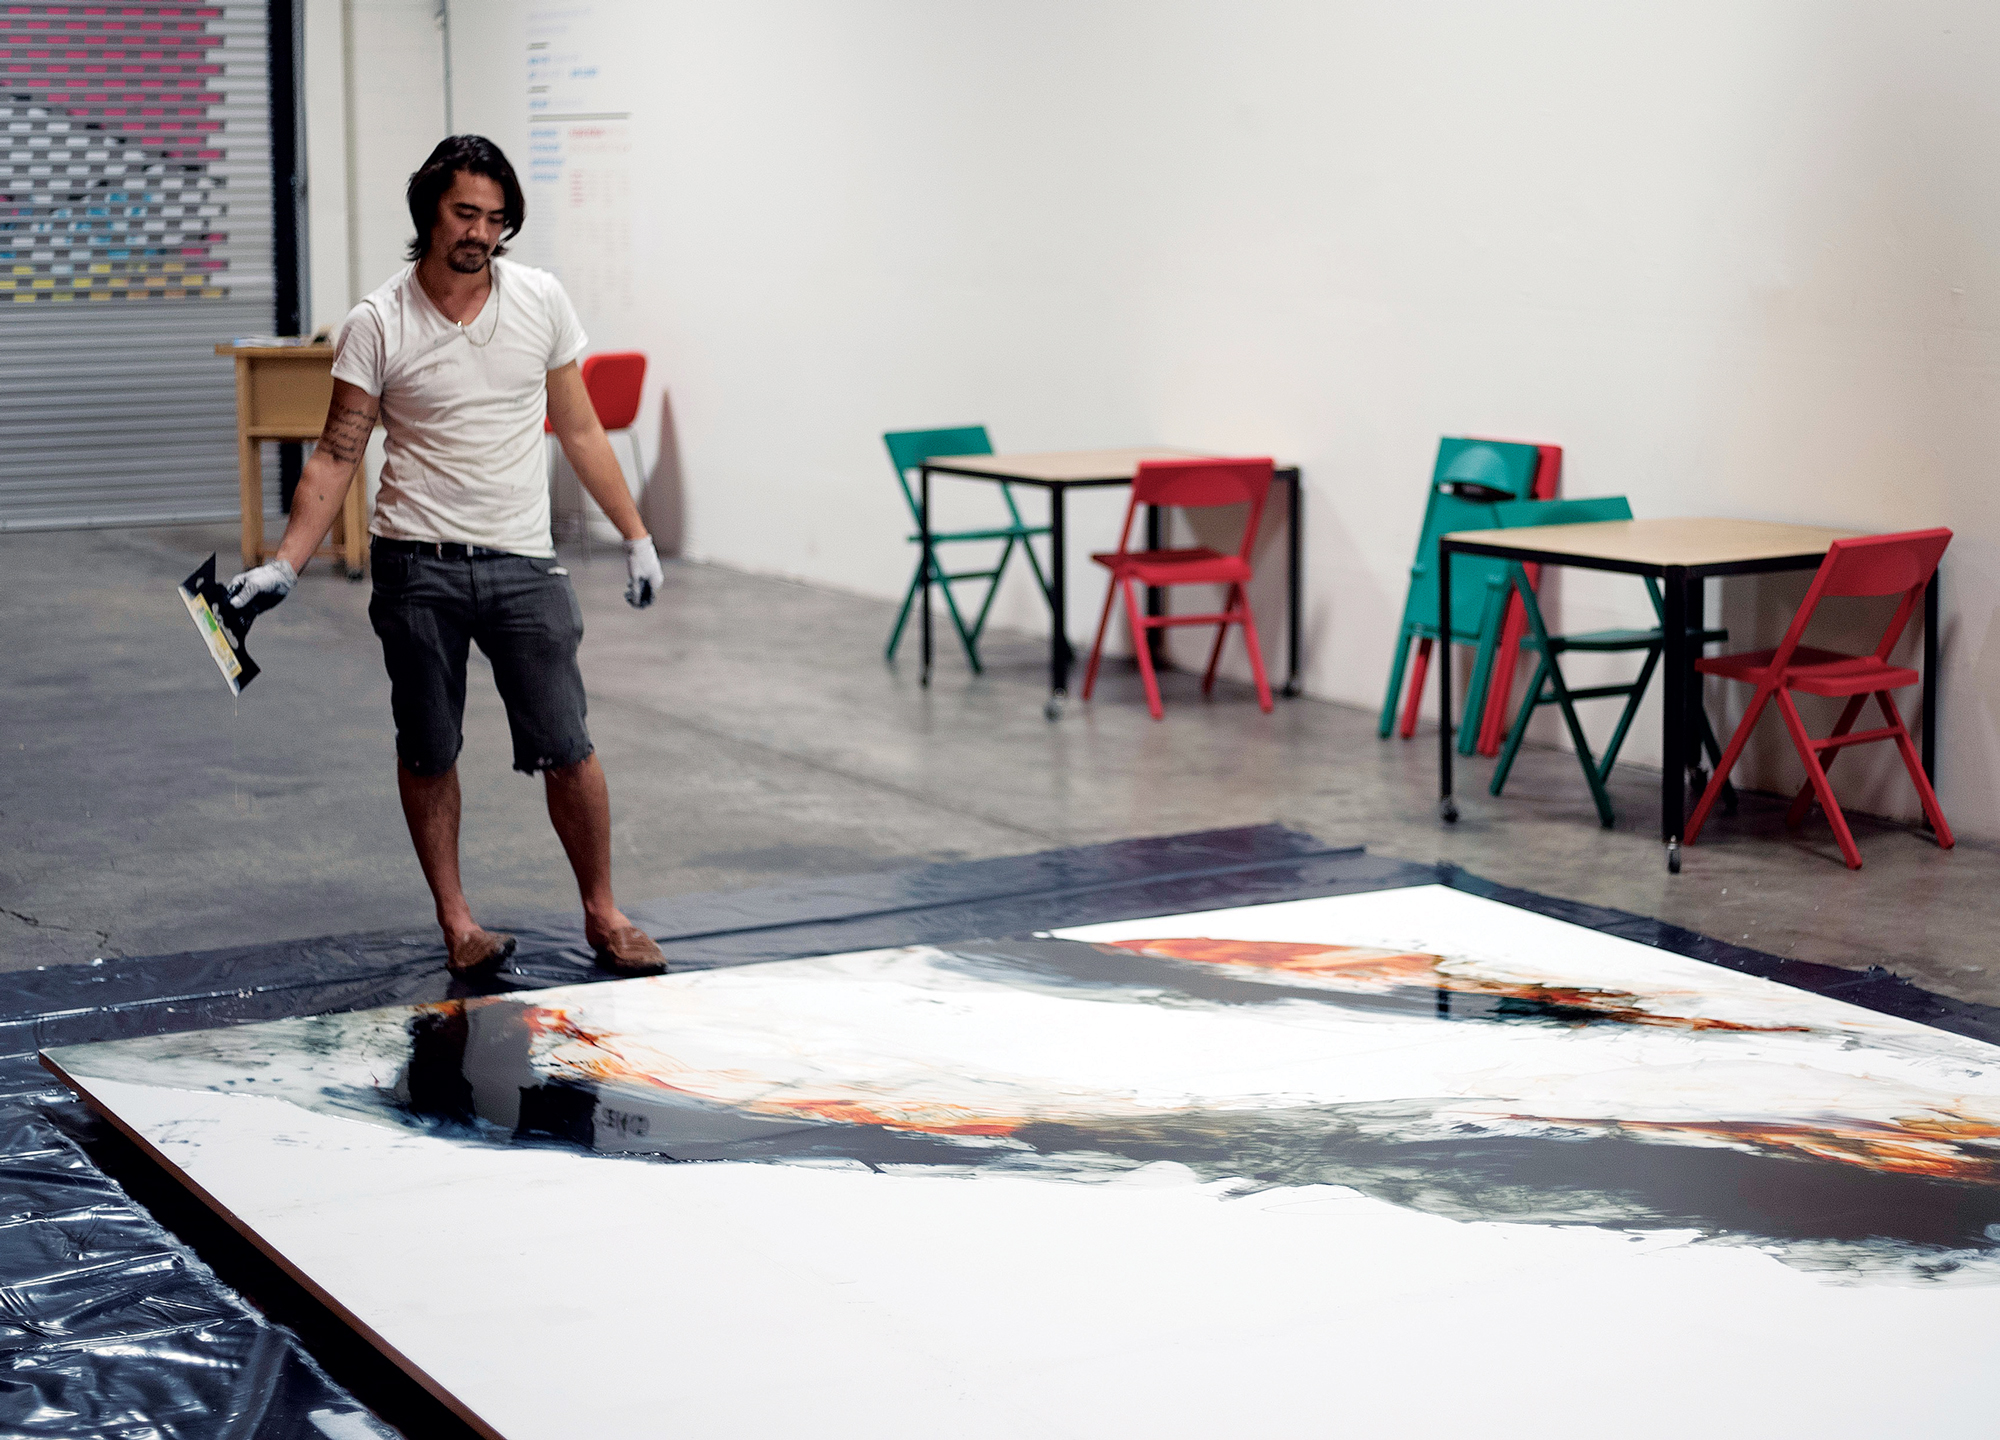 Matthew James ’00 at work on a large-scale painting created for a show in Kaka‘ako in 2015. It was recently installed at Waialua High School.